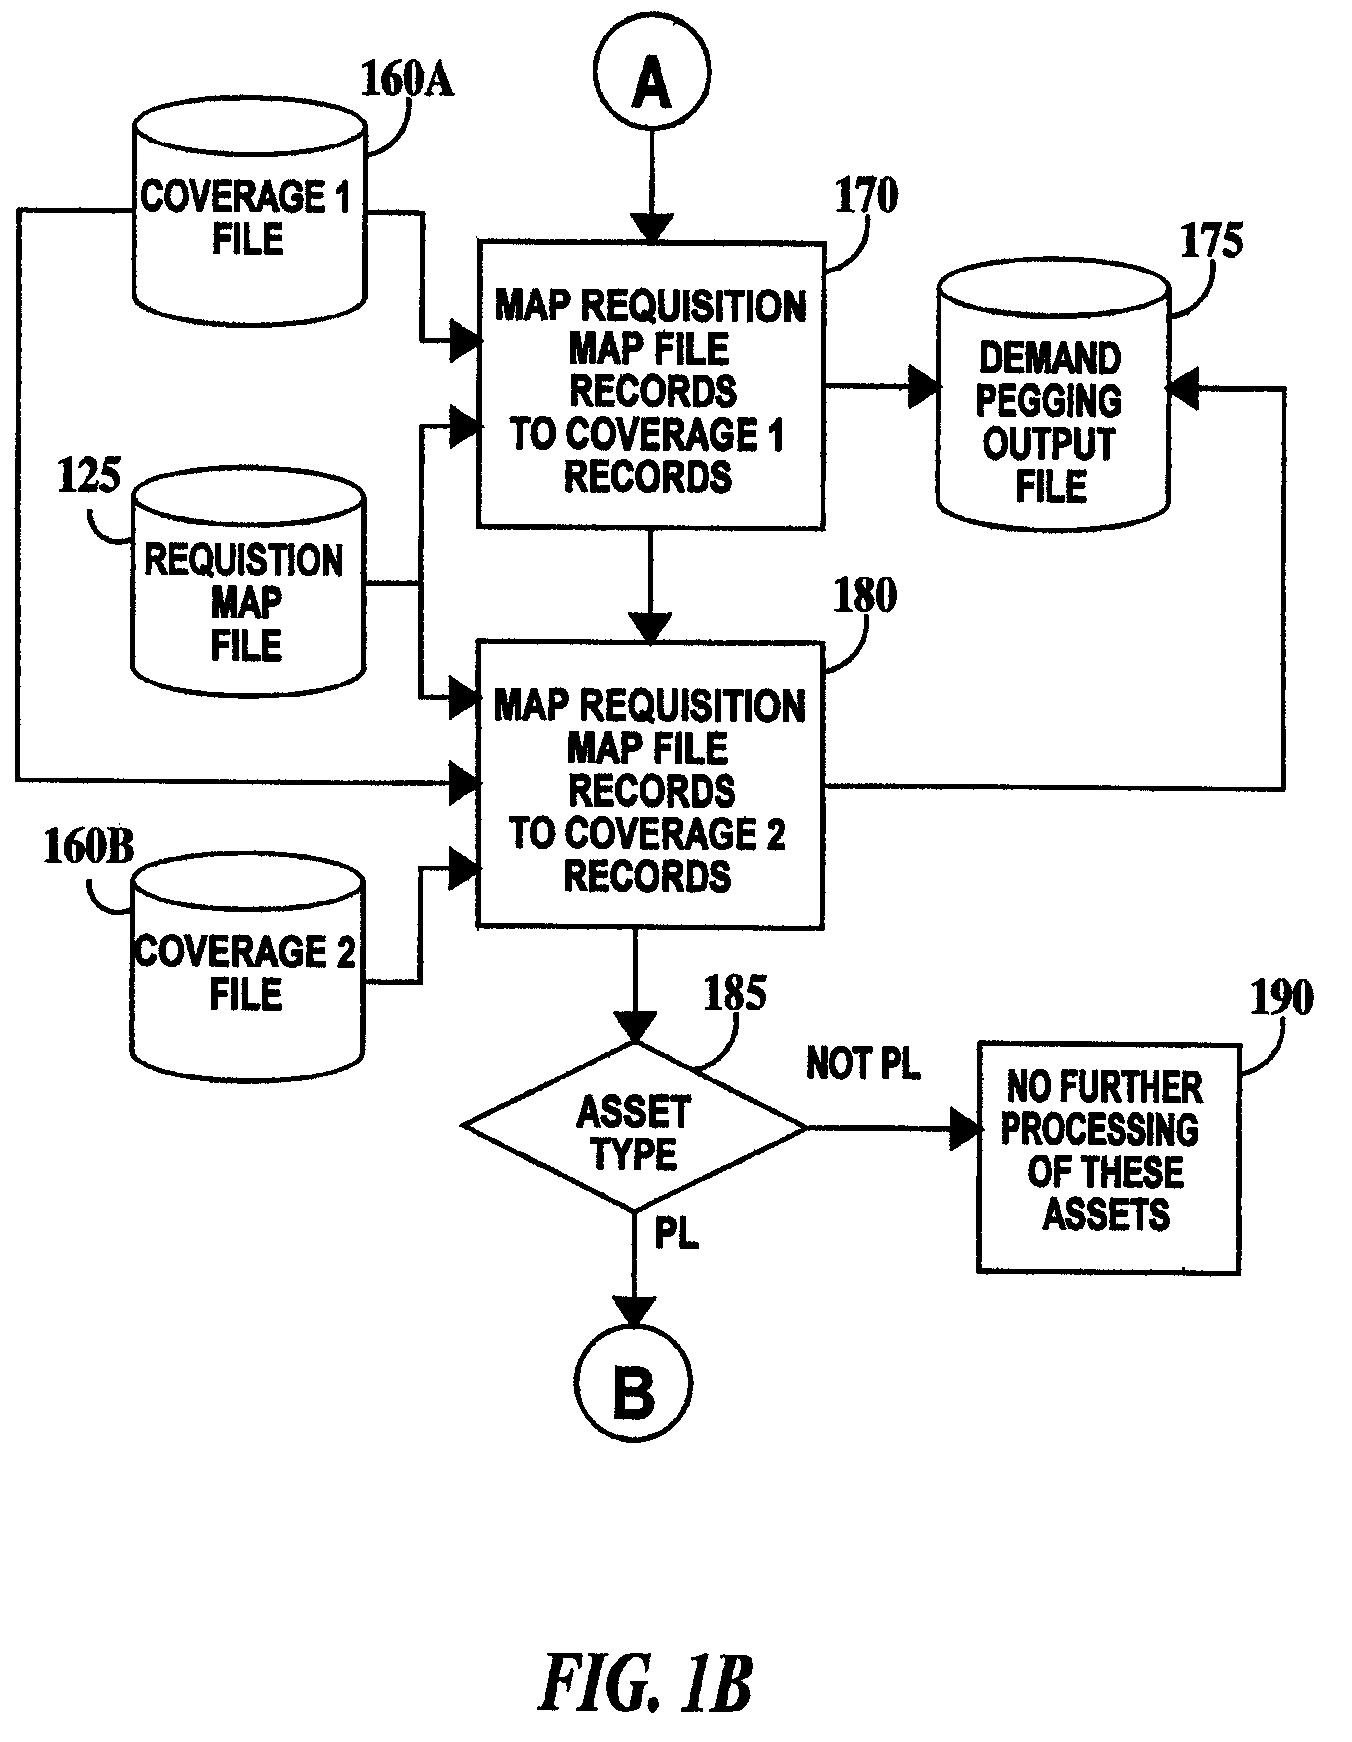 Method for identifying product assets in a supply chain used to satisfy multiple customer demands